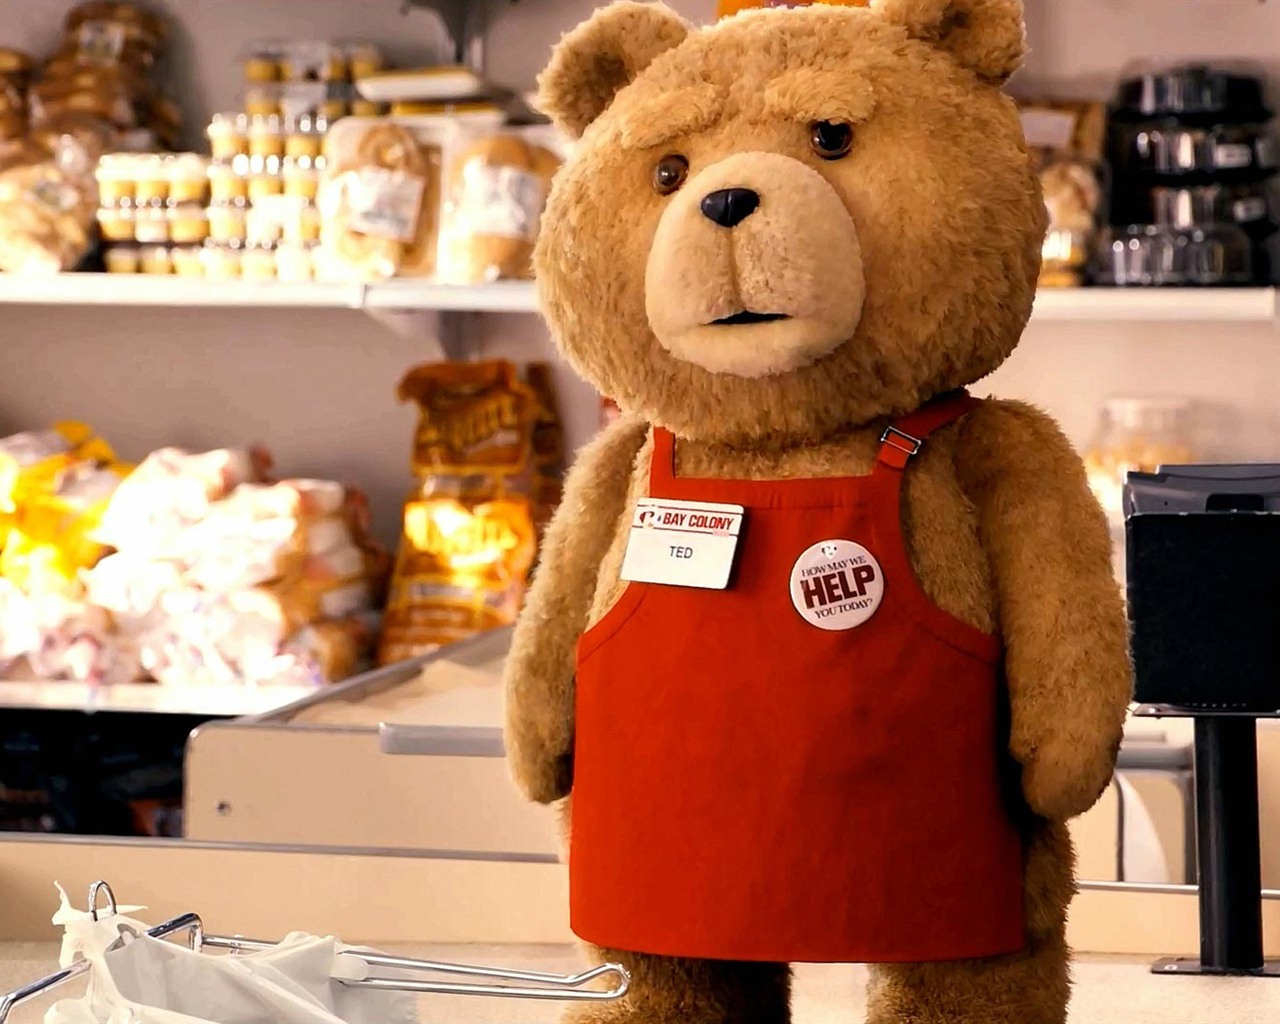 Ted 2012 HD movie wallpapers #14 - 1280x1024